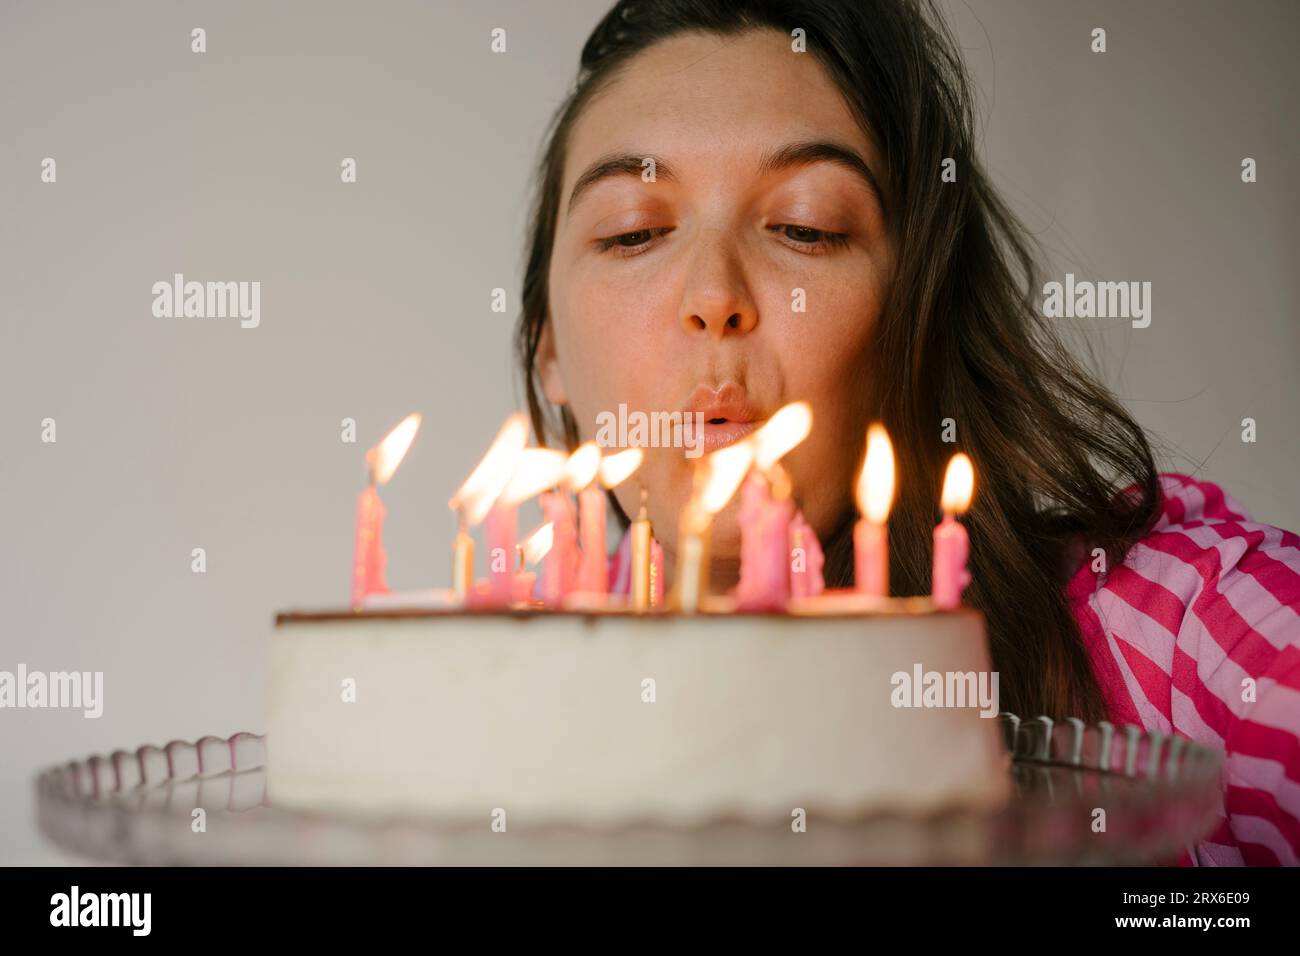 Woman blowing candles on birthday cake Stock Photo